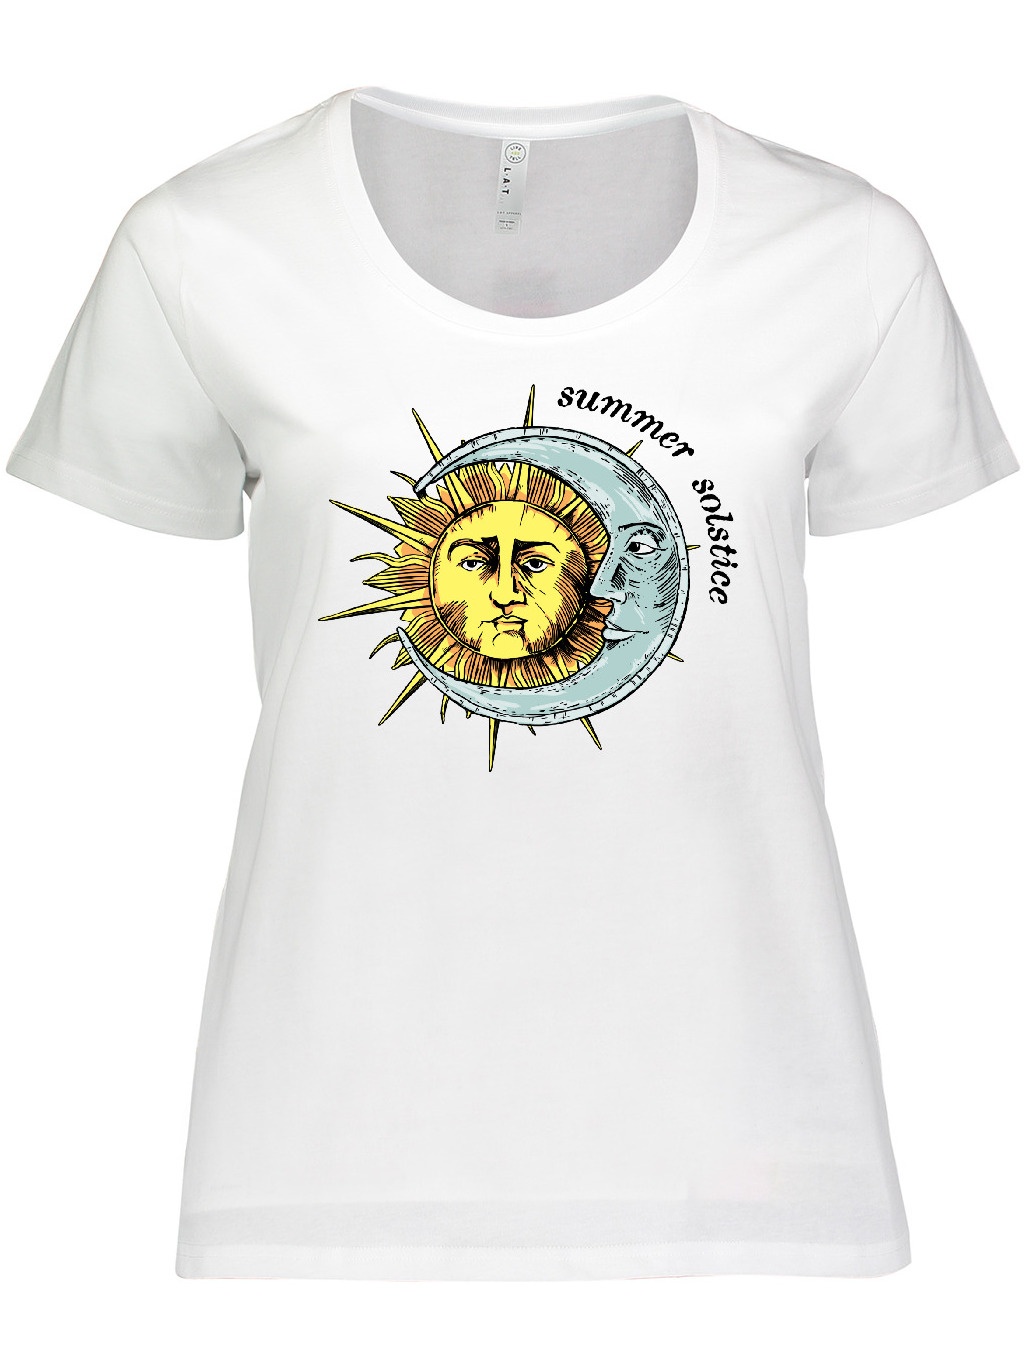 Inktastic Summer Solstice Sun and Moon Women's Plus Size T-Shirt - image 1 of 4